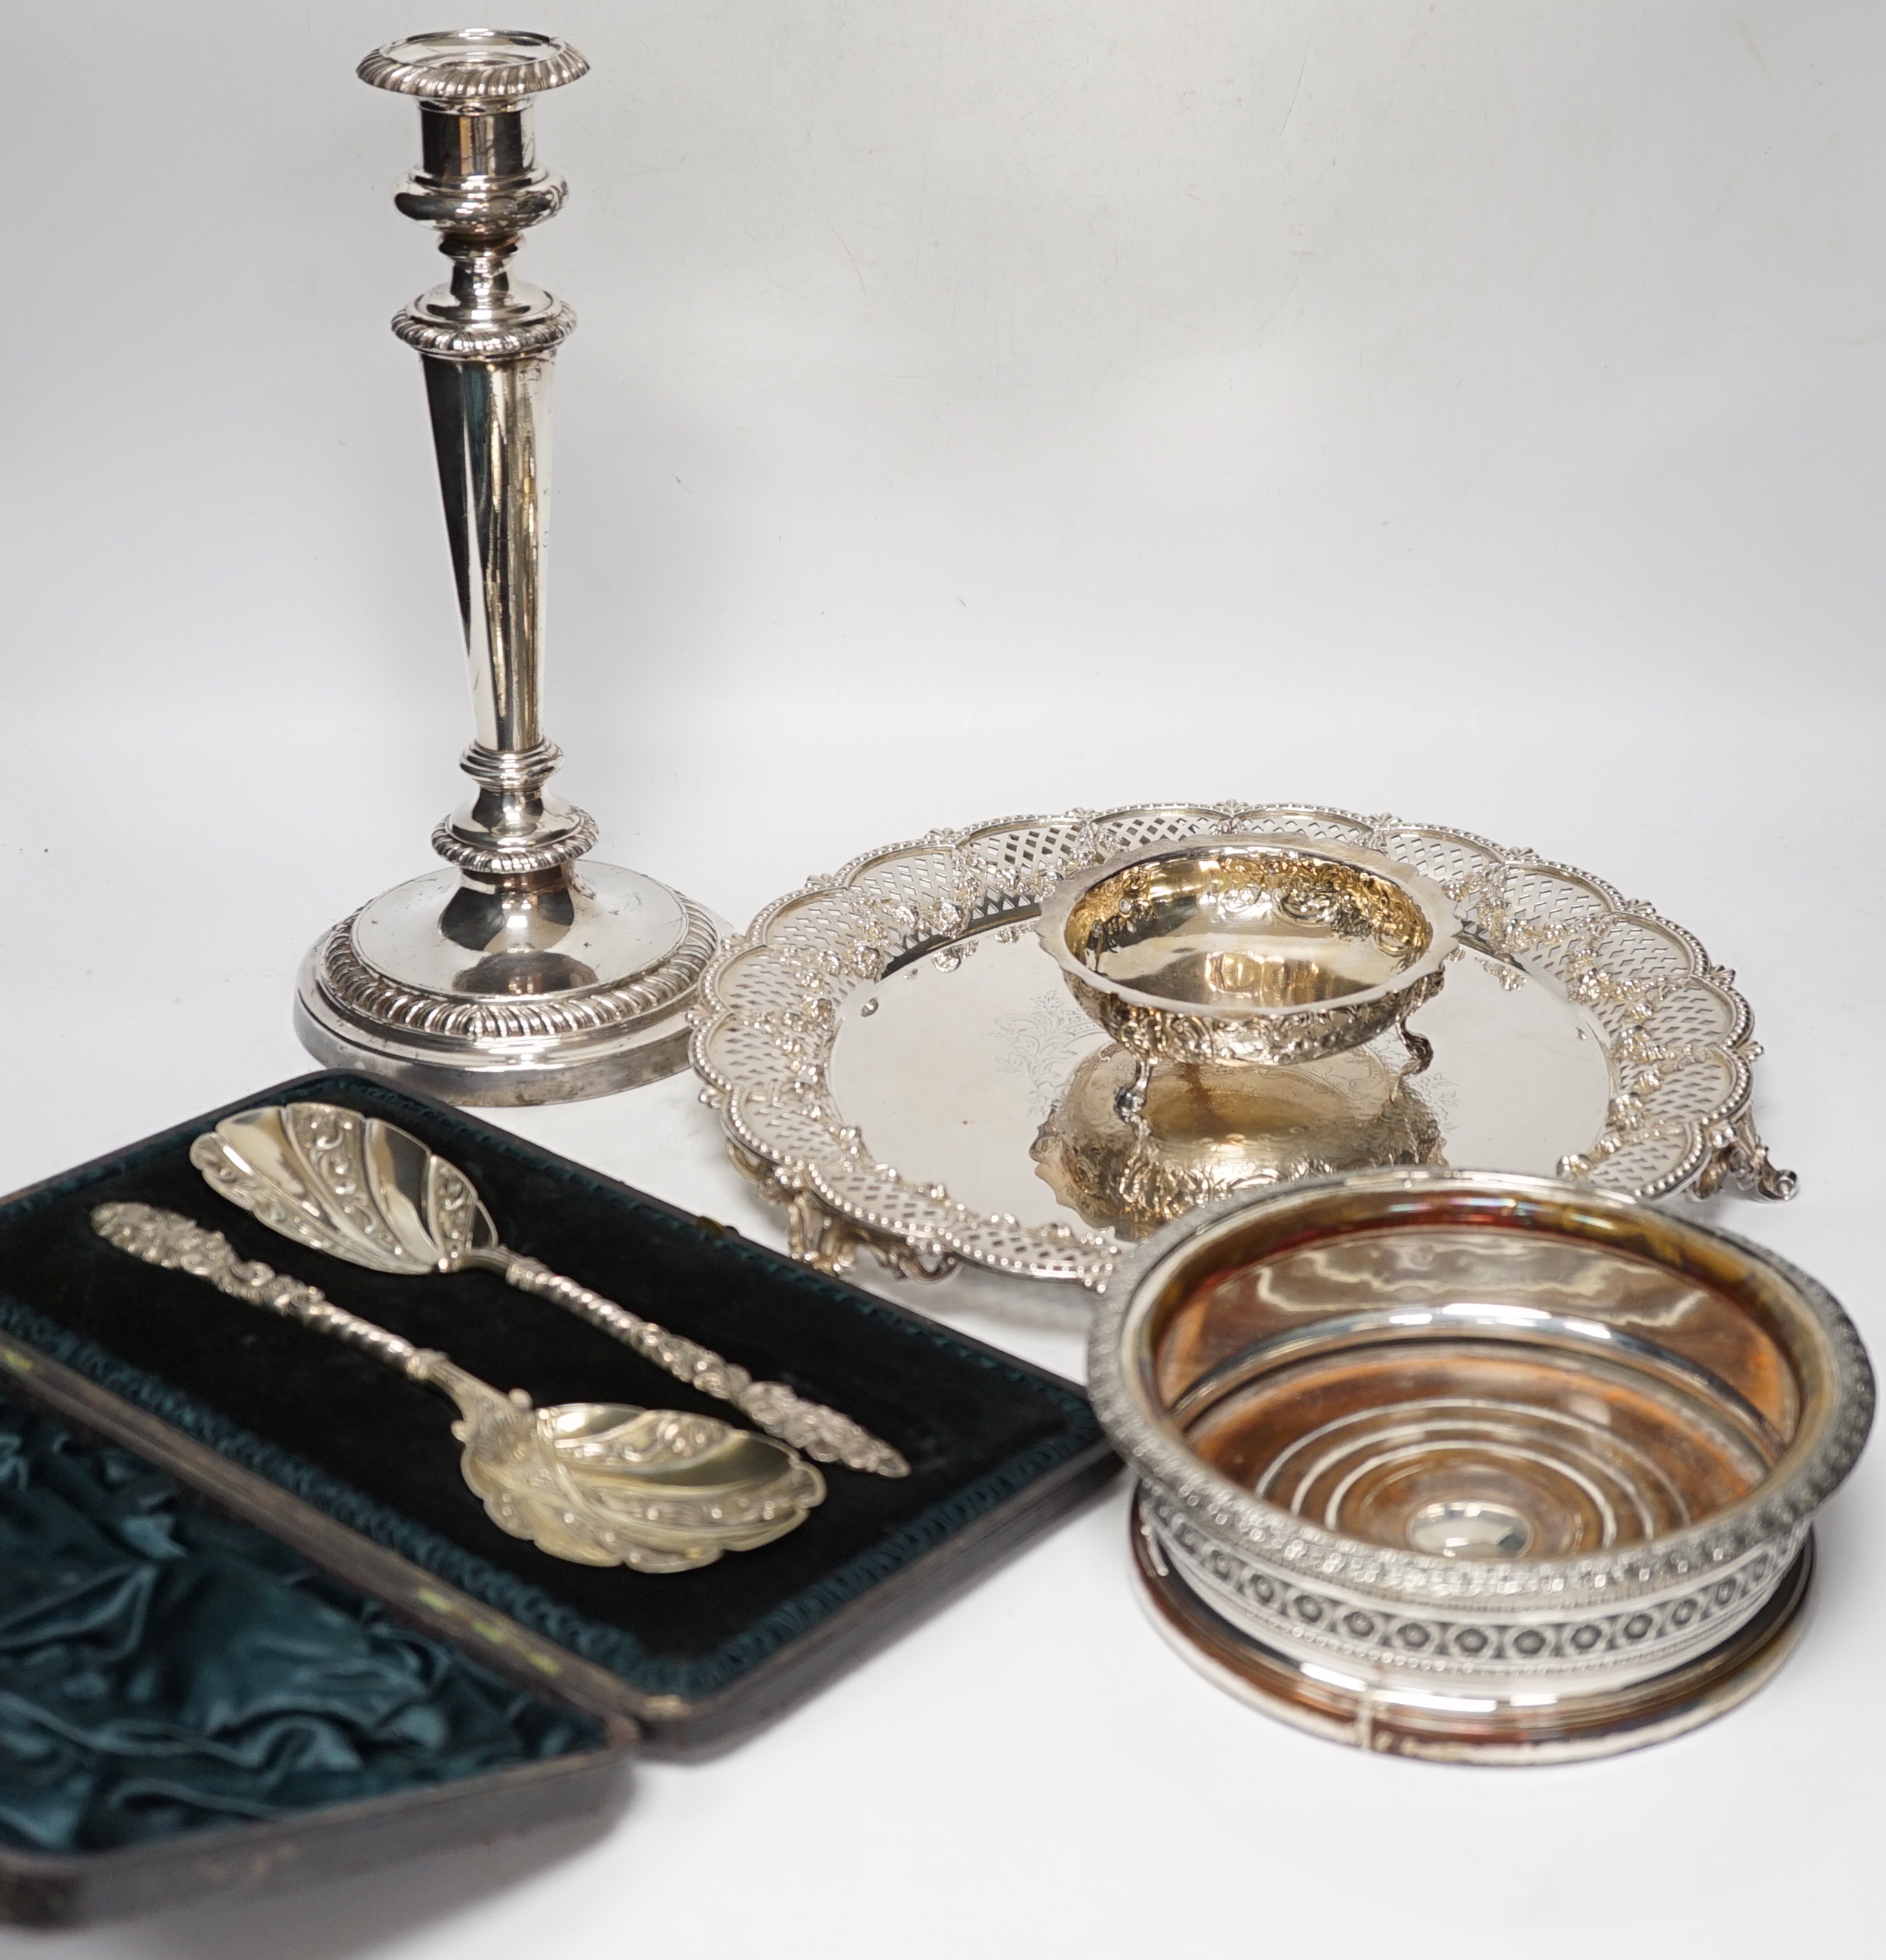 Plated wares: a pair of wine coasters, two ornate basket-edged dishes, a sugar bowl, three candlesticks, three candleholders, a teapot, ice bucket cased serving spoons and a metal mounted glass decanter.